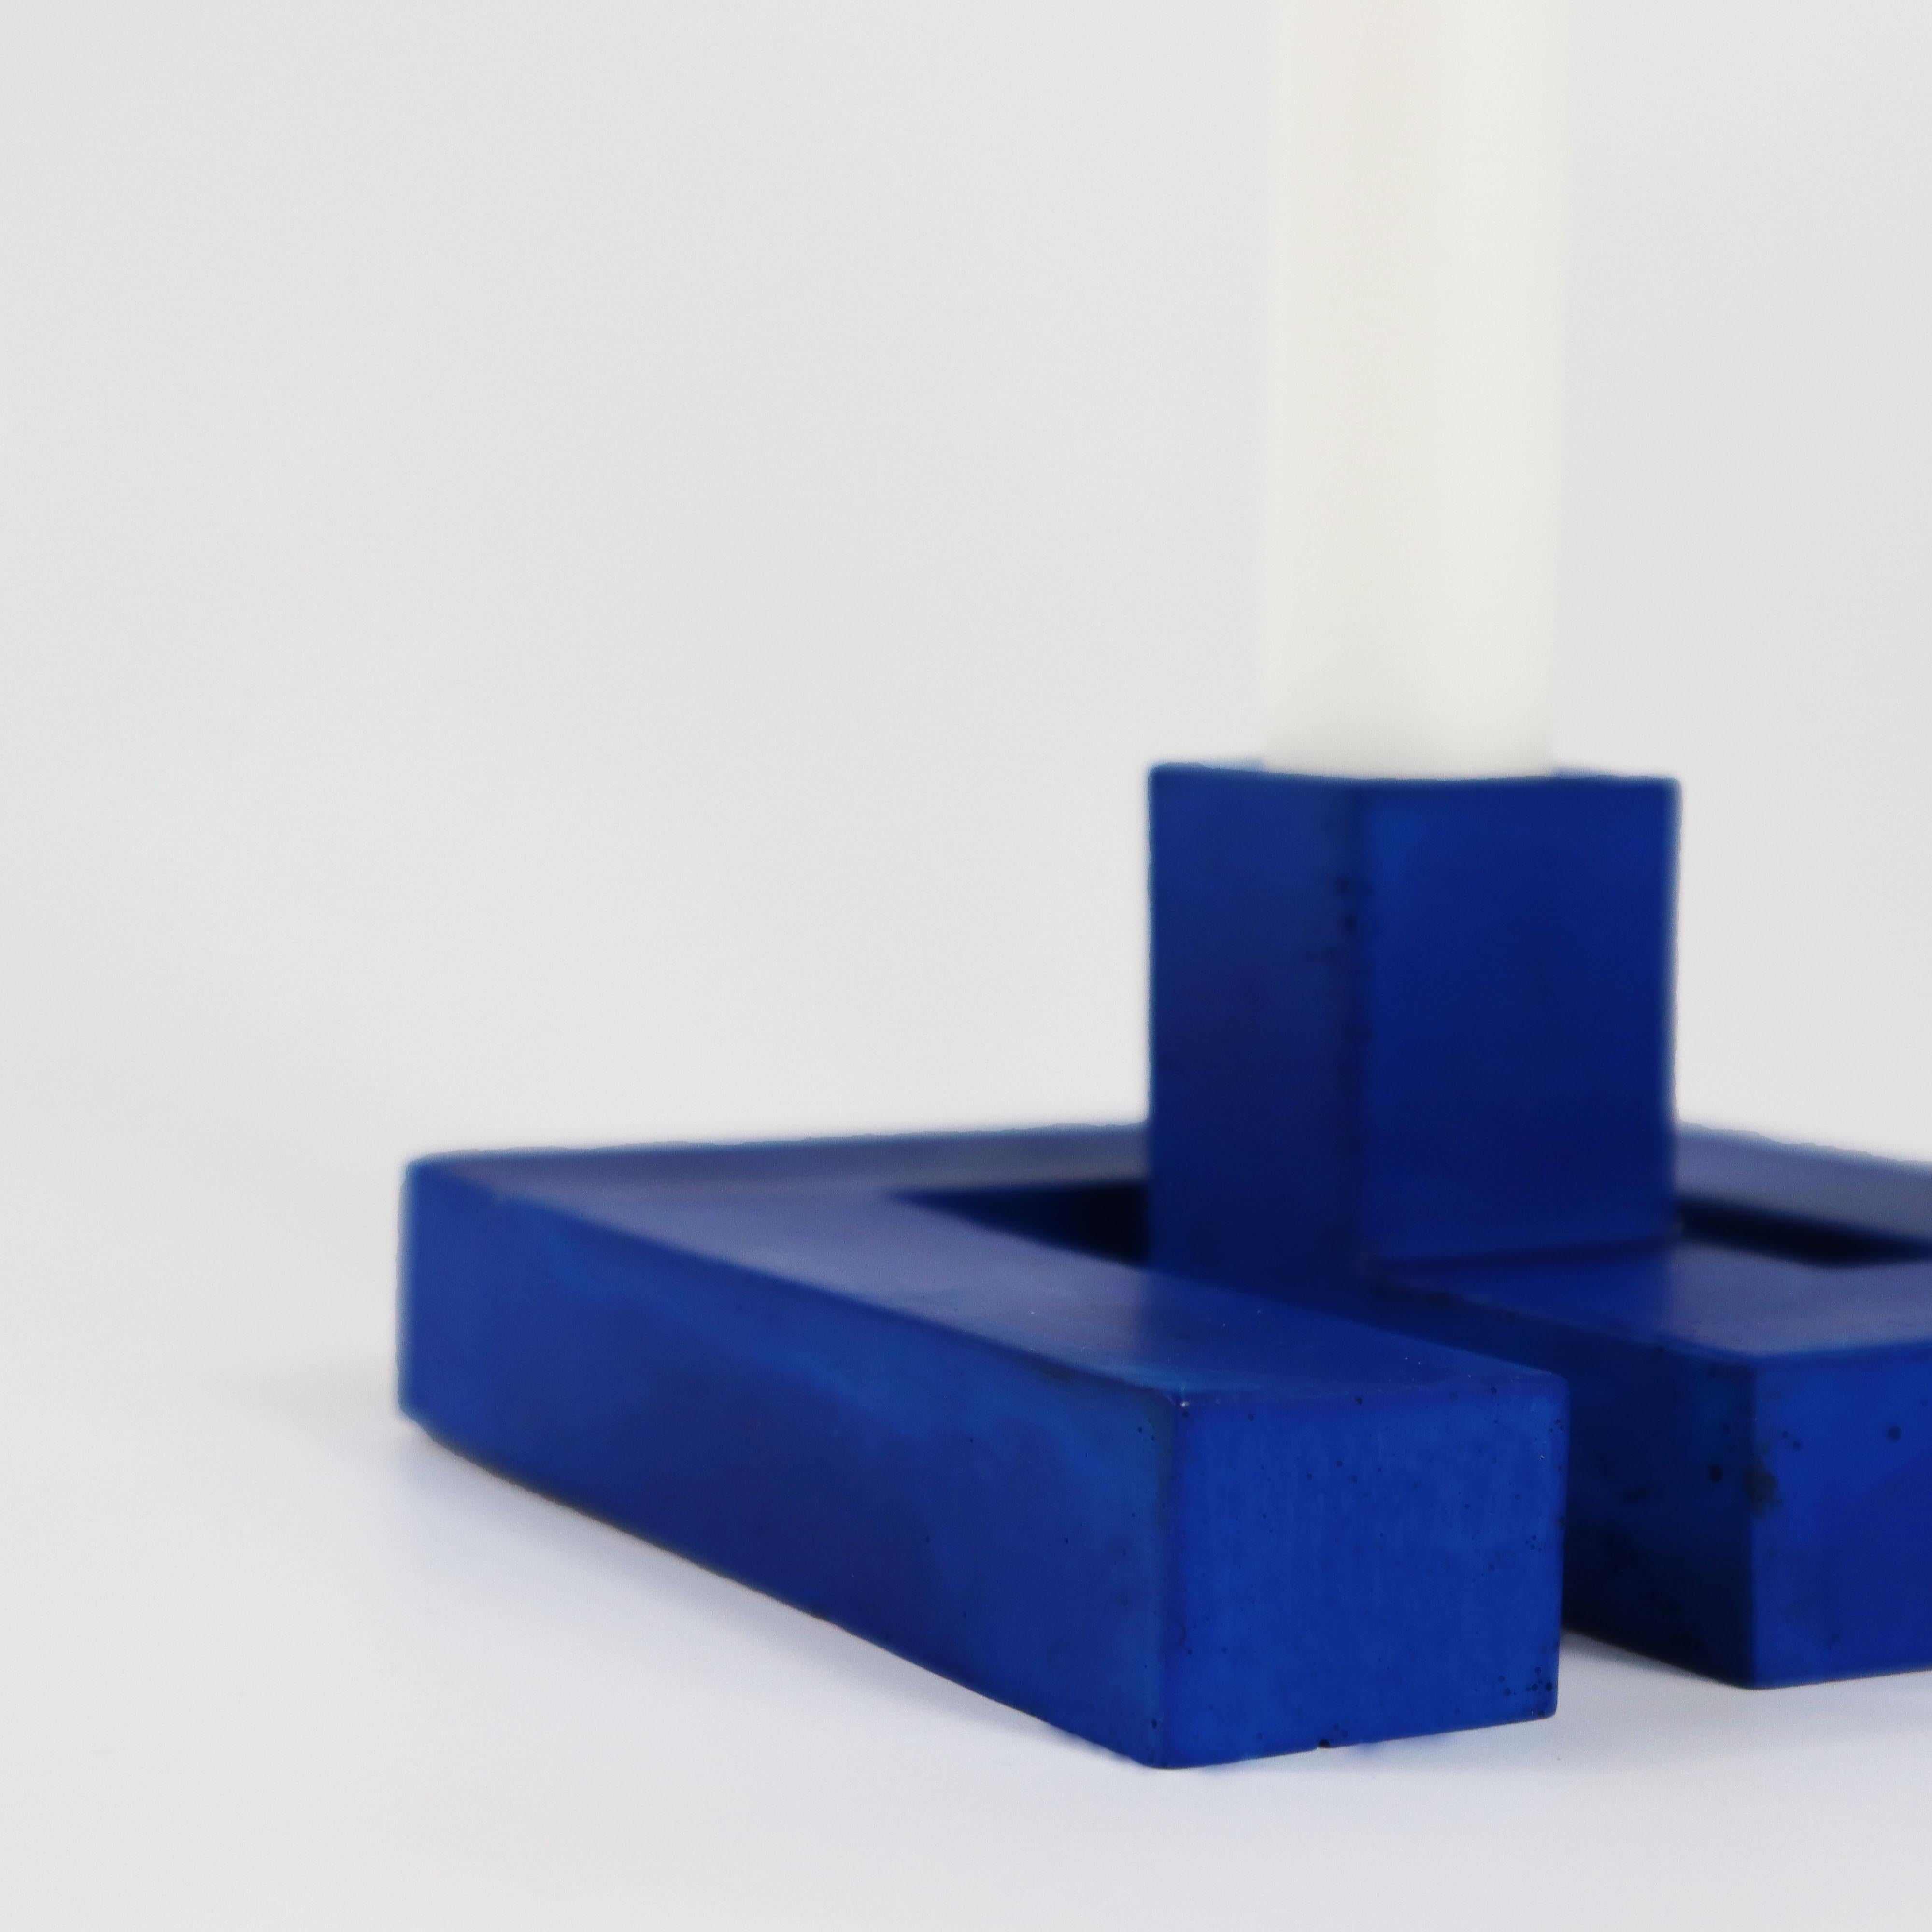 Introducing the Royal Blue Maze Taper: A Sculptural Candle Holder Inspired by Garden Mazes

Add a touch of elegance to your space with our Royal Blue Maze Taper. This exquisite geometric candle holder is a stunning centerpiece for your dining room